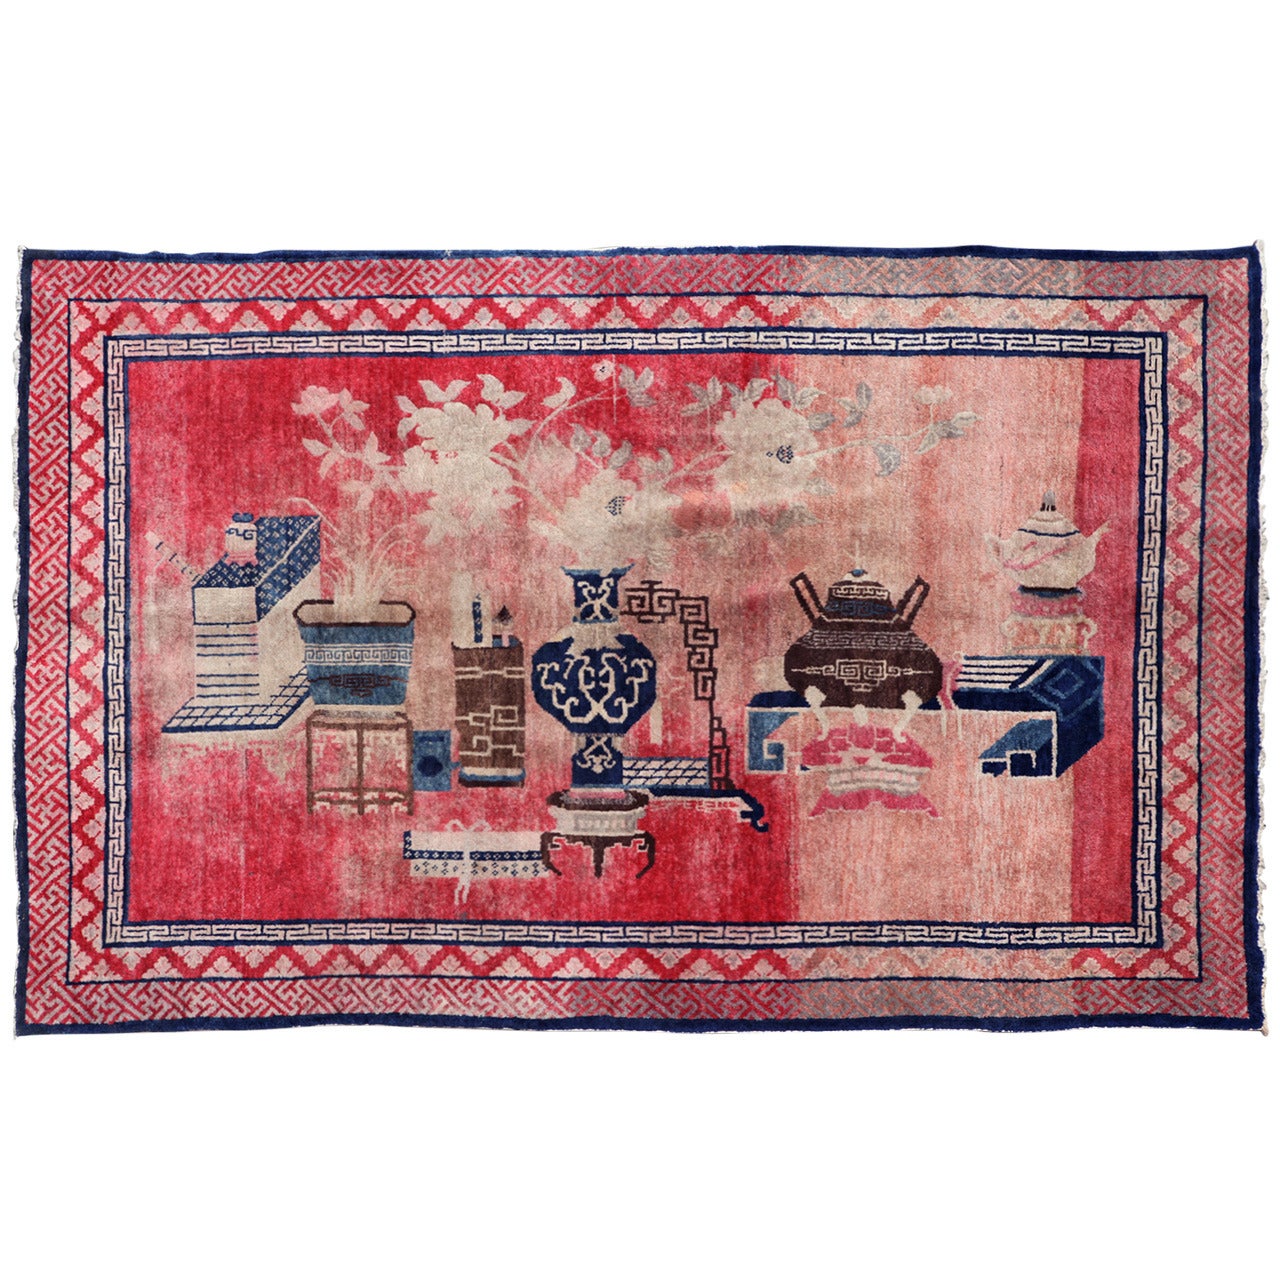 Charming Large Antique Chinese Baotou Pictorial Rug